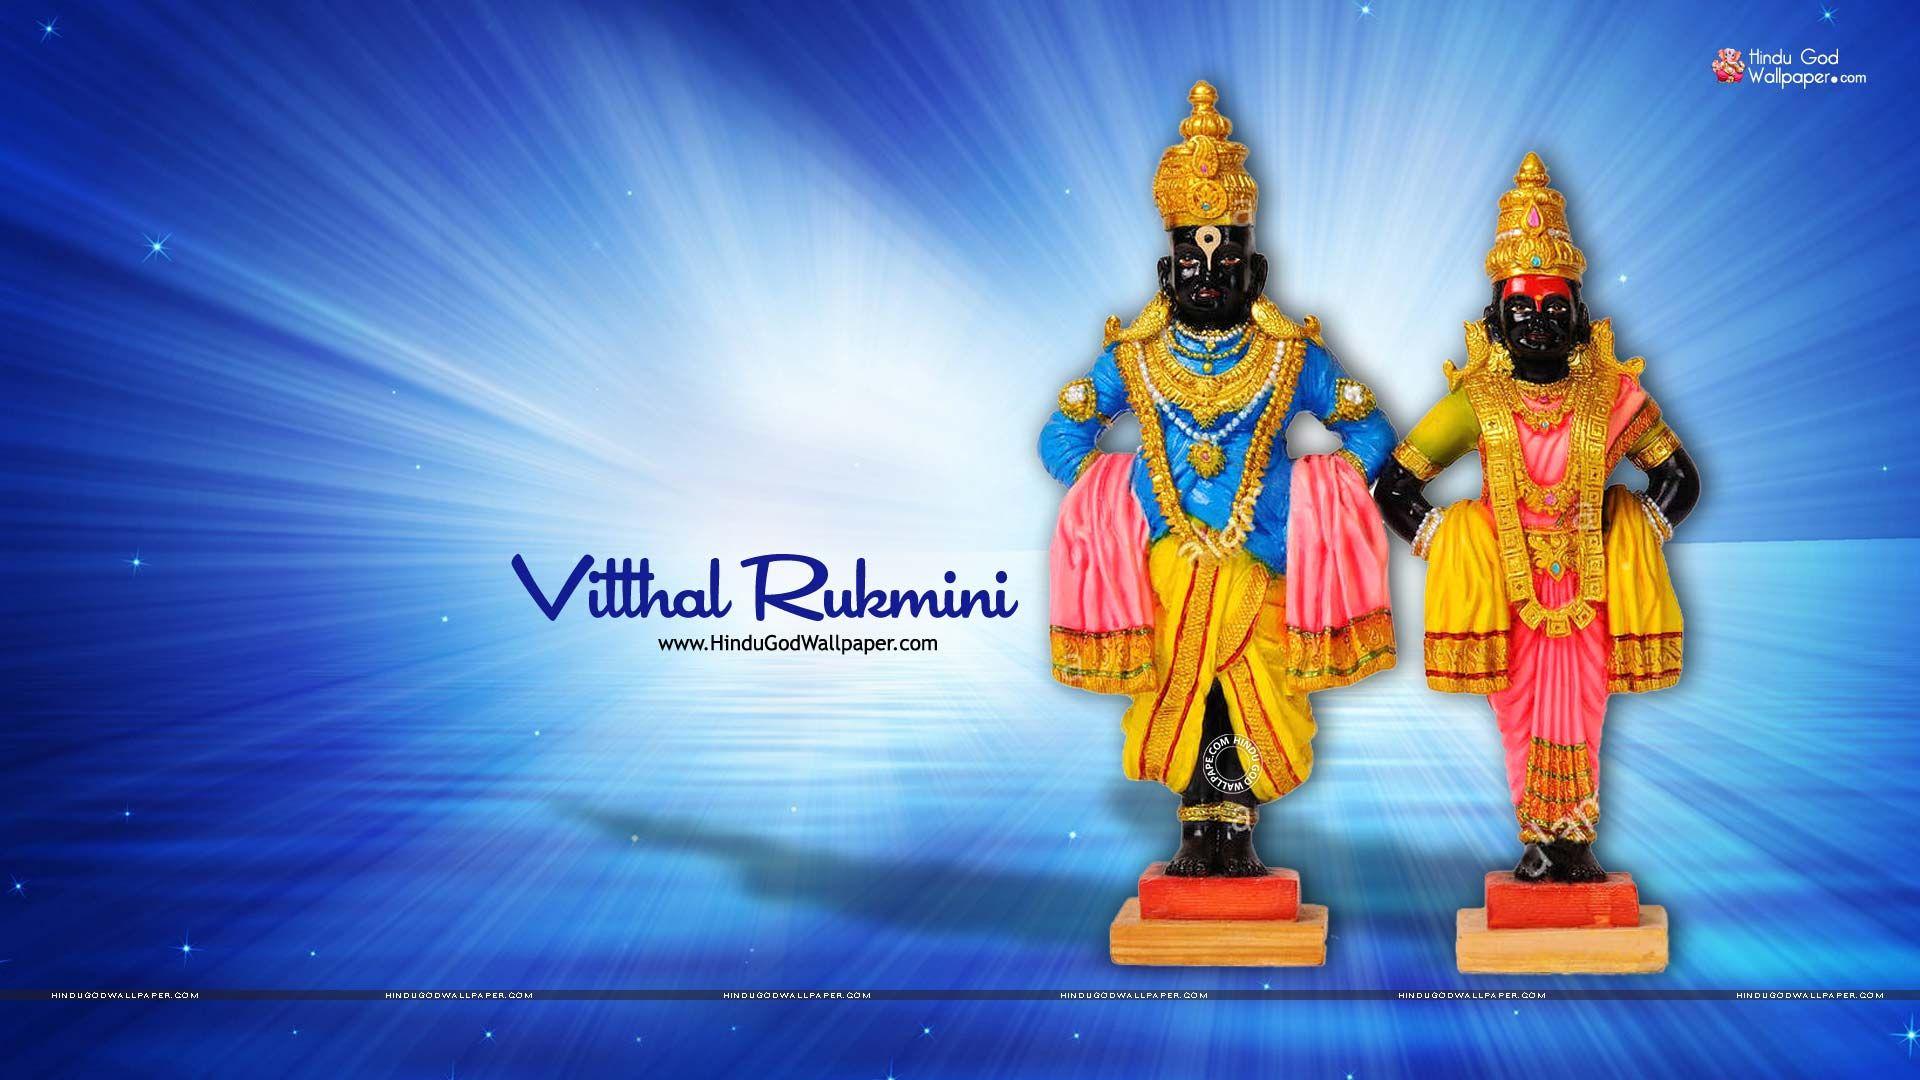 Incredible Compilation of 999+ Vitthal Images in Stunning 4K Quality